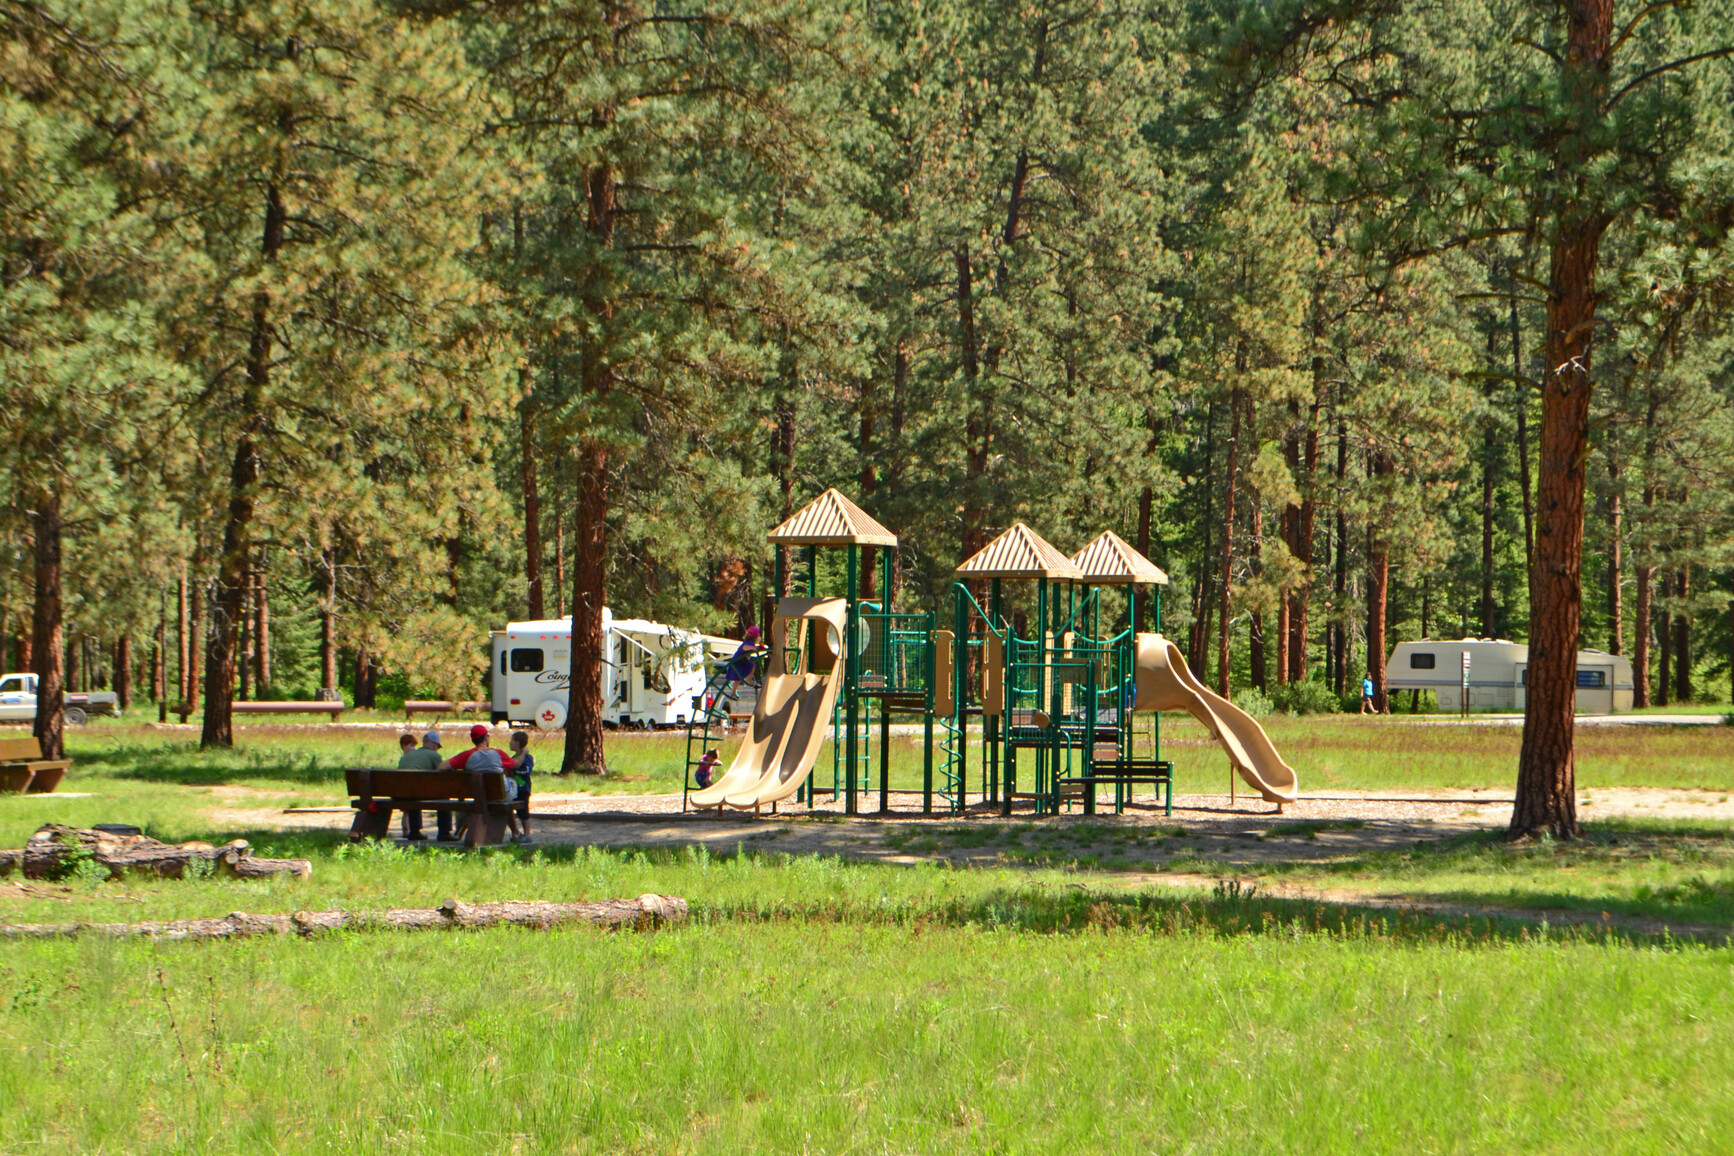 People sitting on picnic table near playground. Campsites with RV's in background.